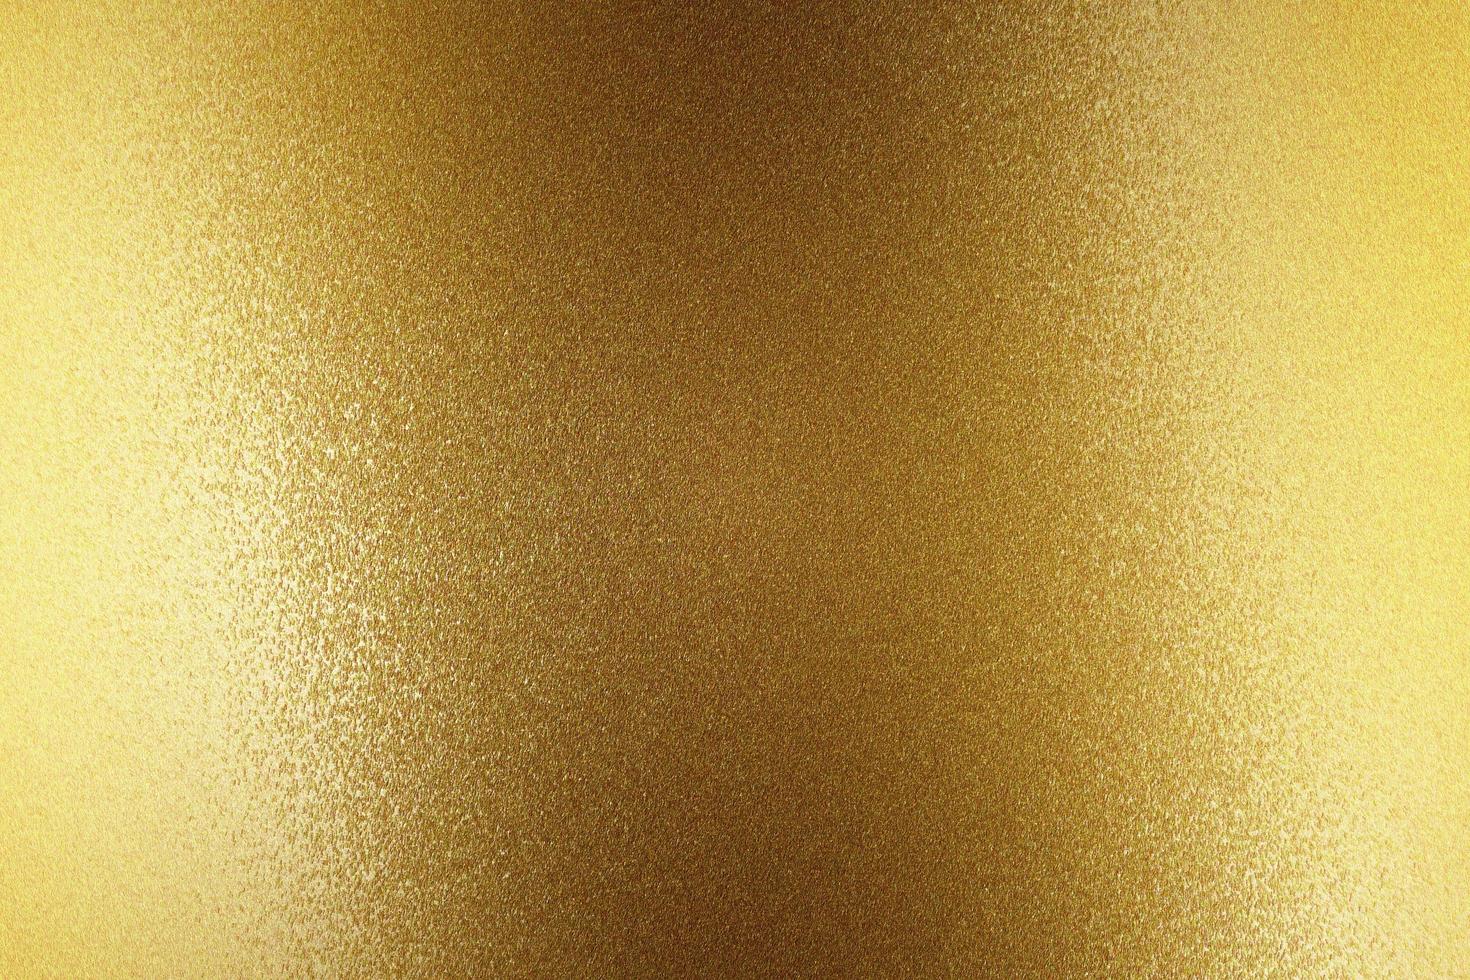 Light shining on gold steel wall, abstract texture background photo